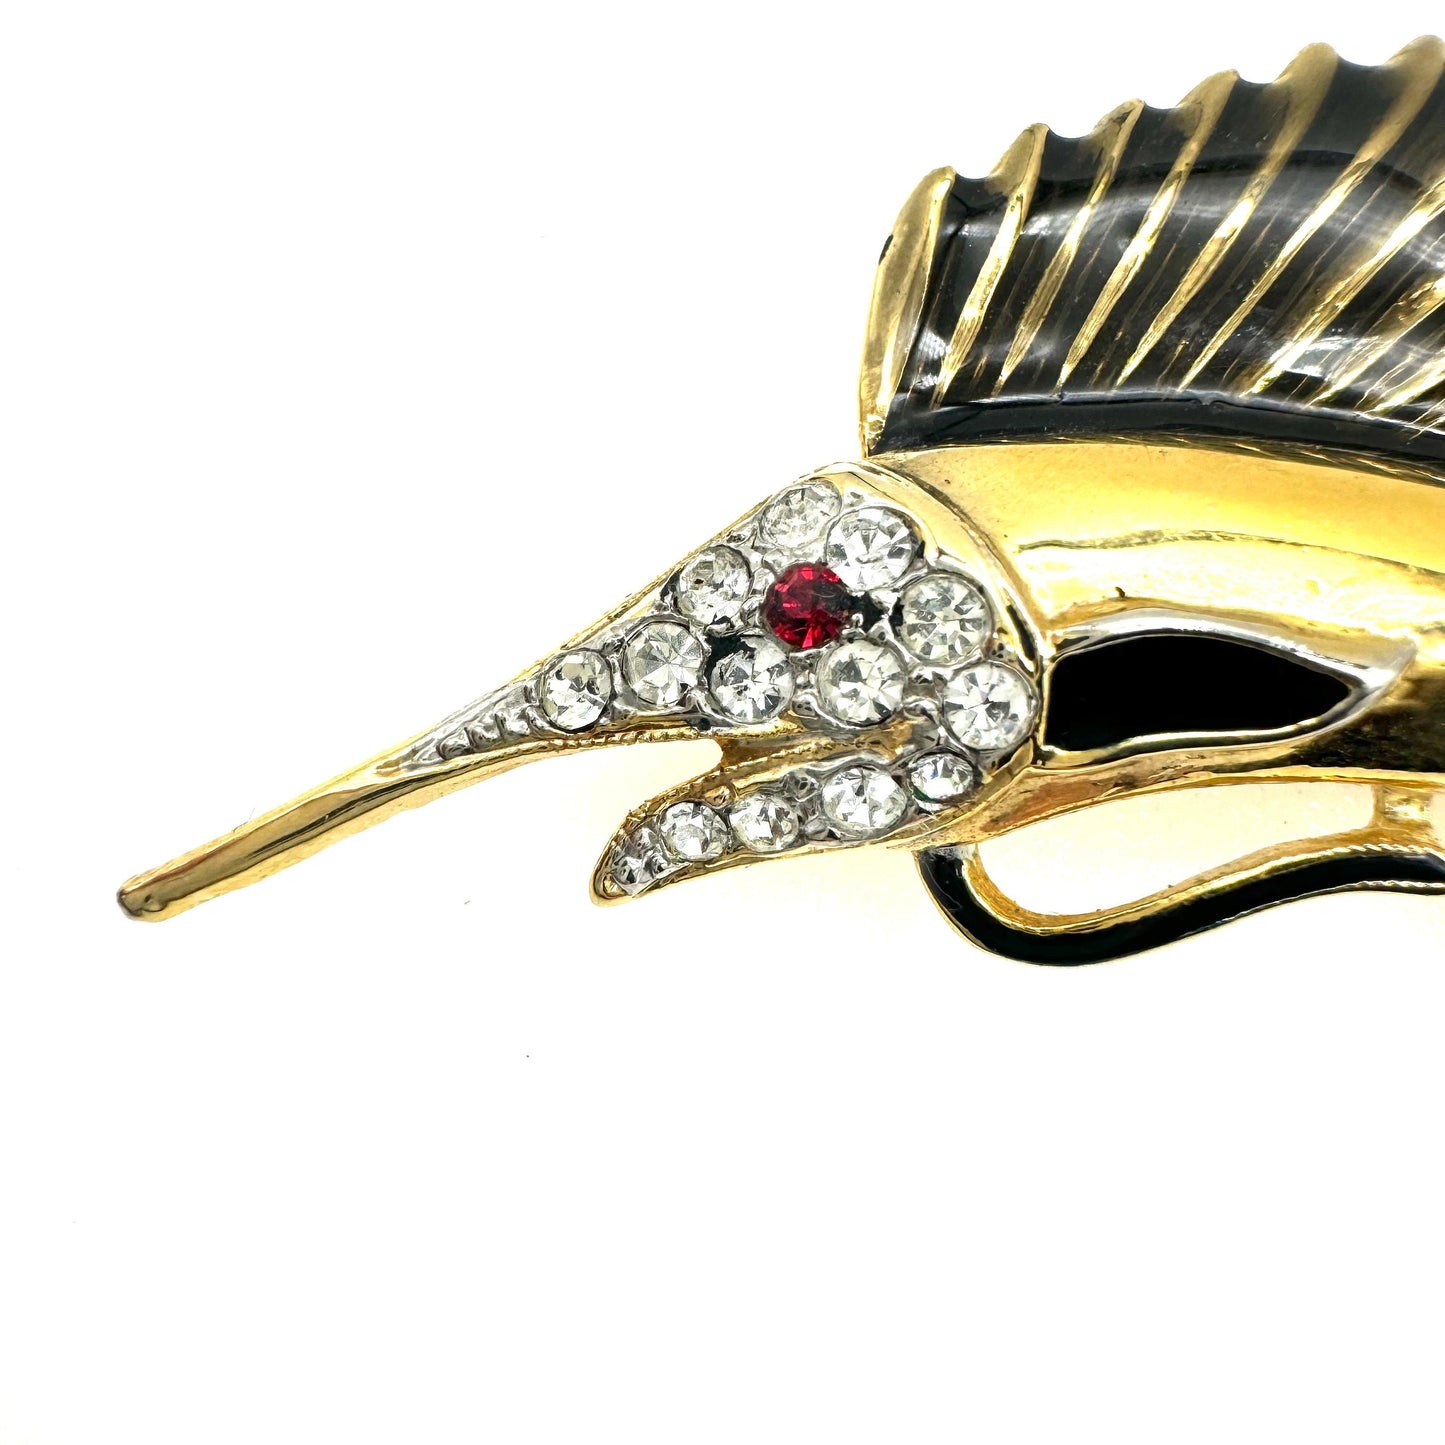 Unsigned Enamel, Lacquer and Rhinestone Sailfish Brooch